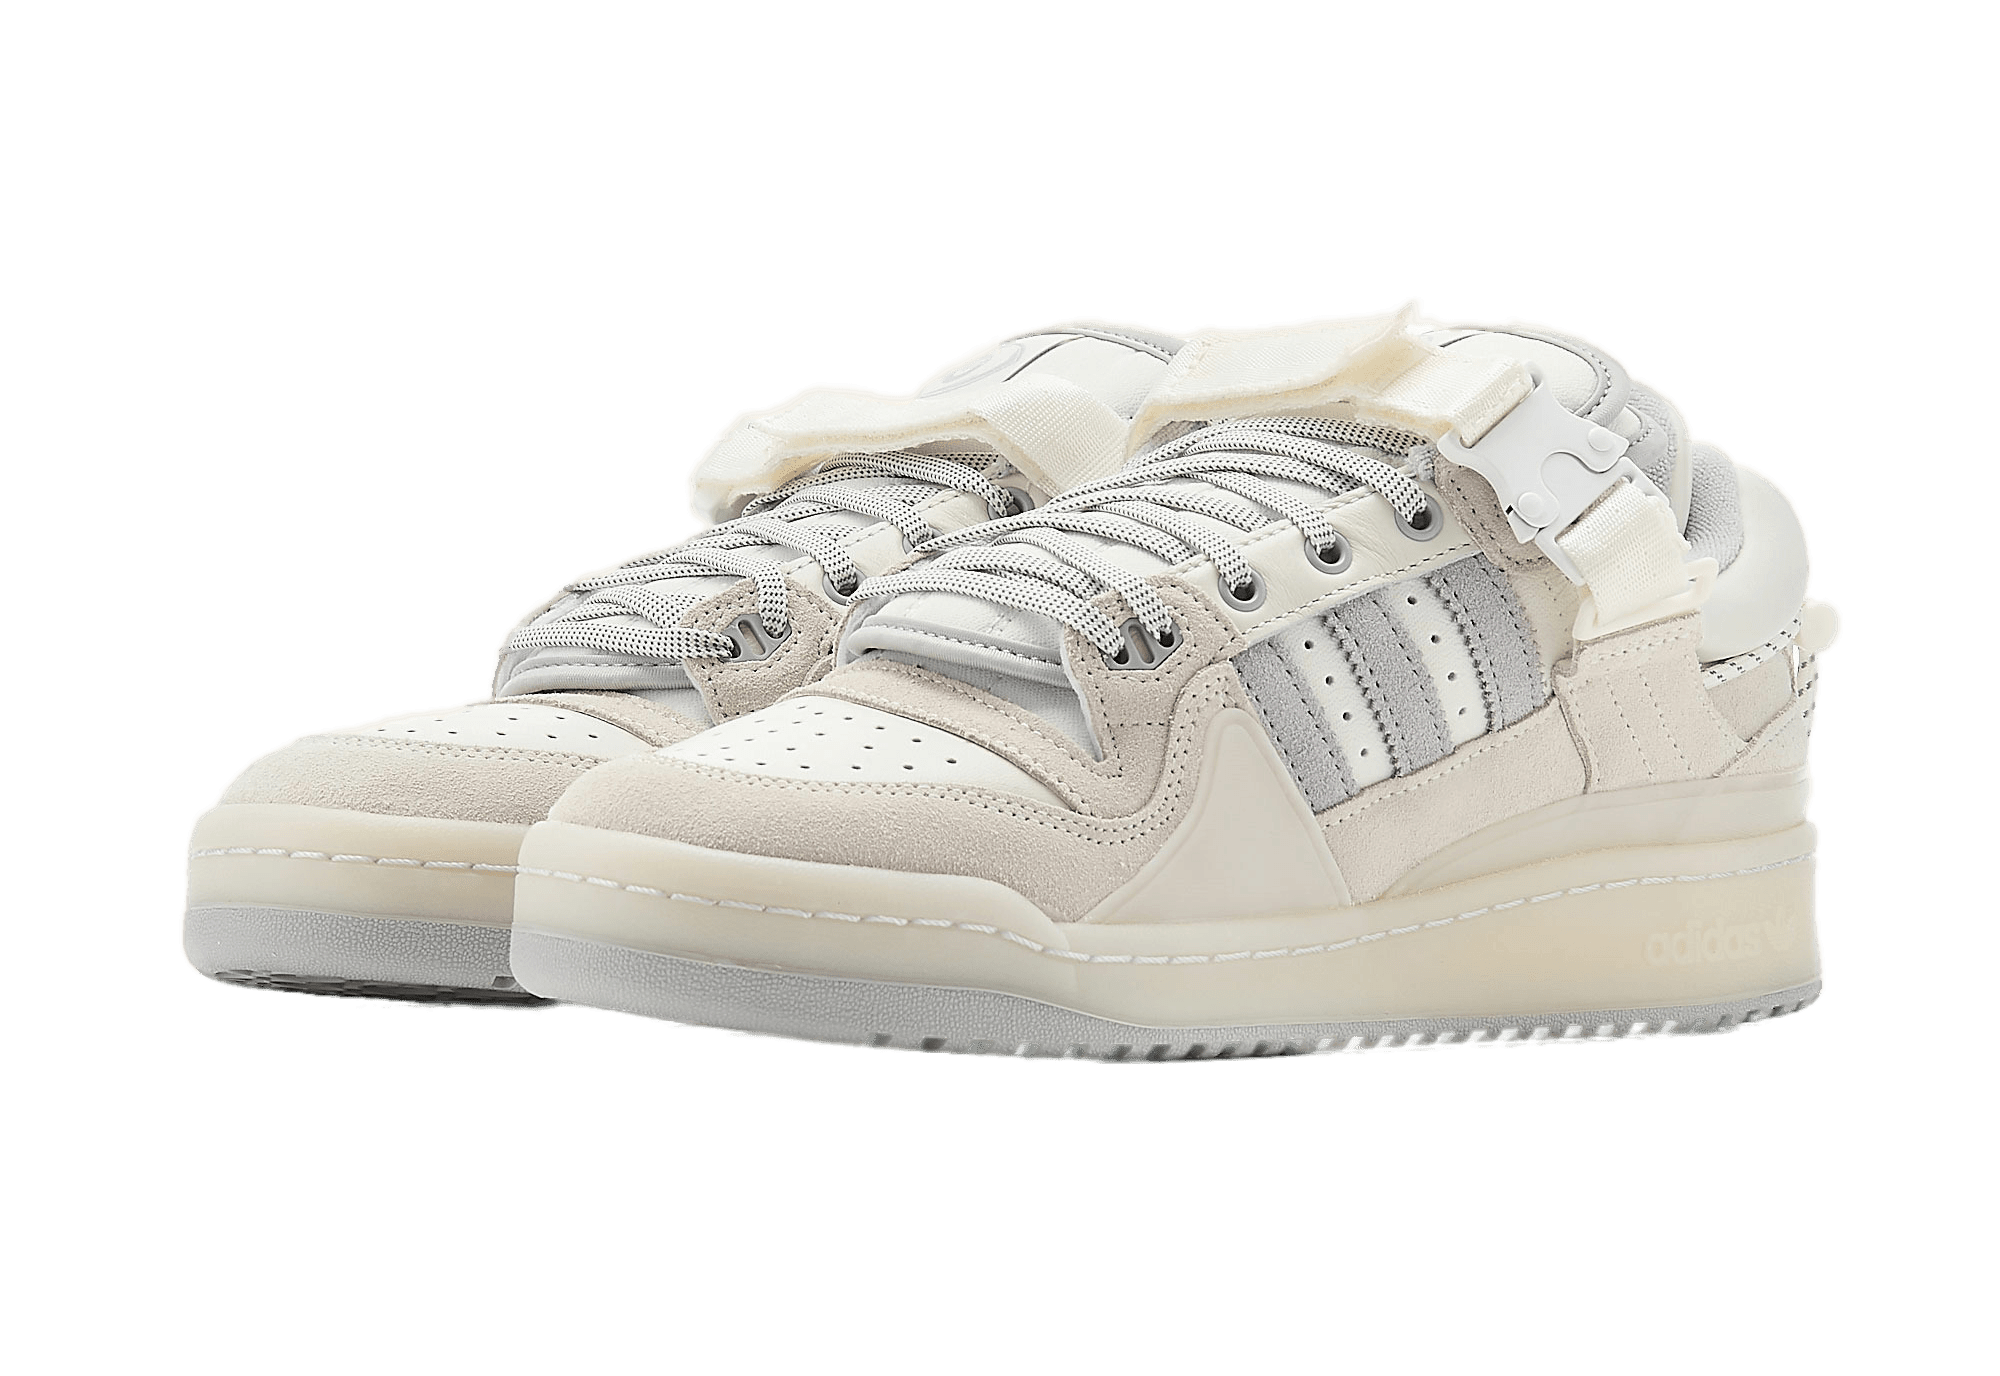 Low White Forum Adidas Bad Cloud SneakCenter Bunny x –